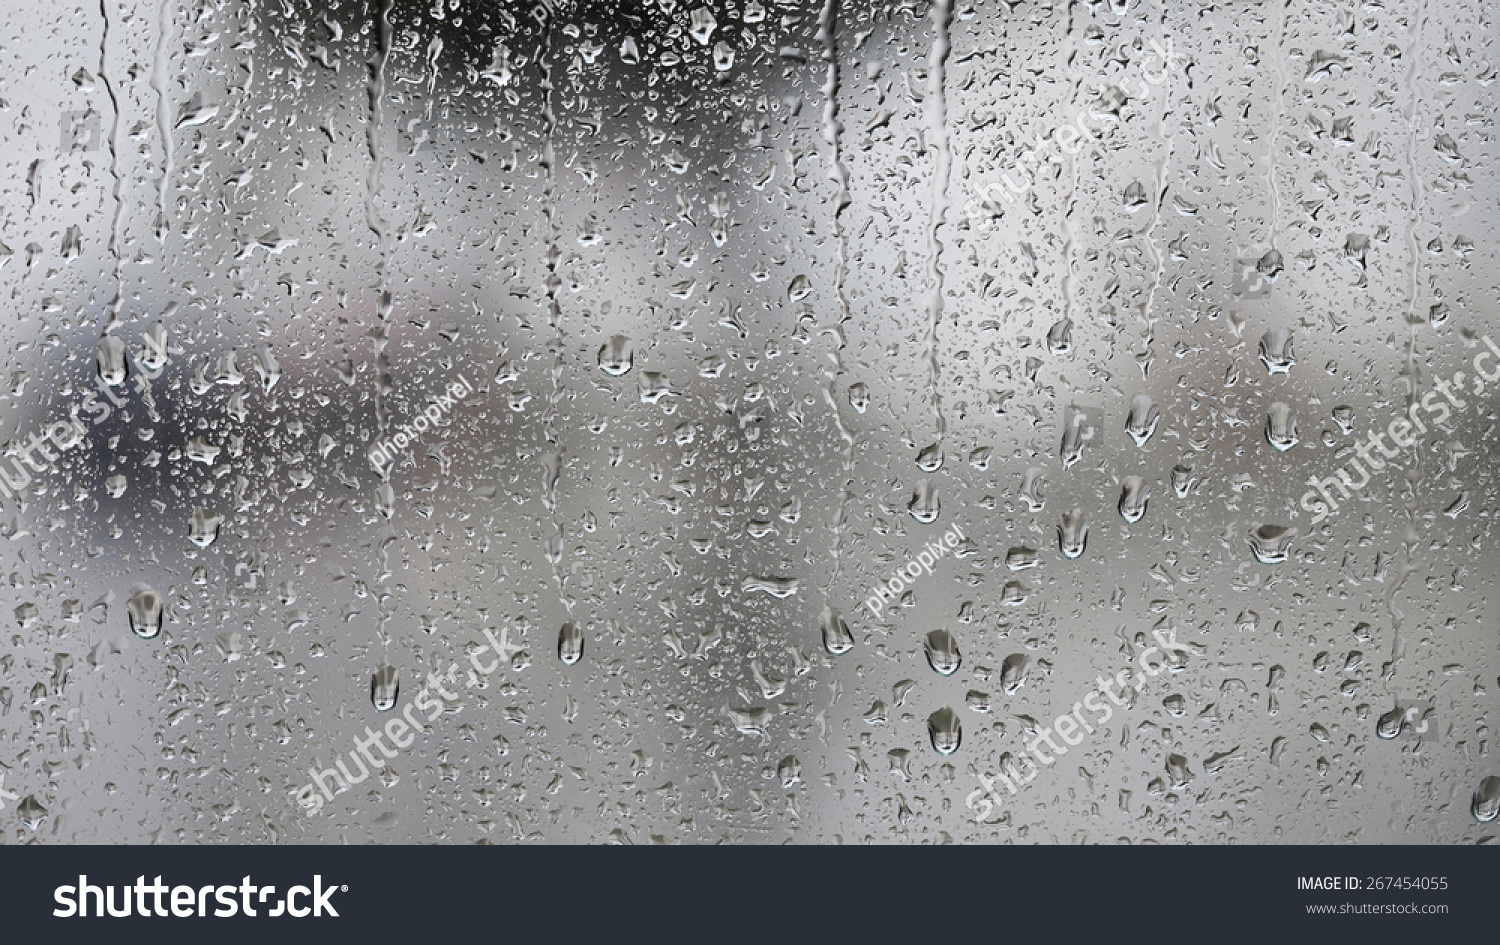 Raindrops on the window, abstract background  #267454055